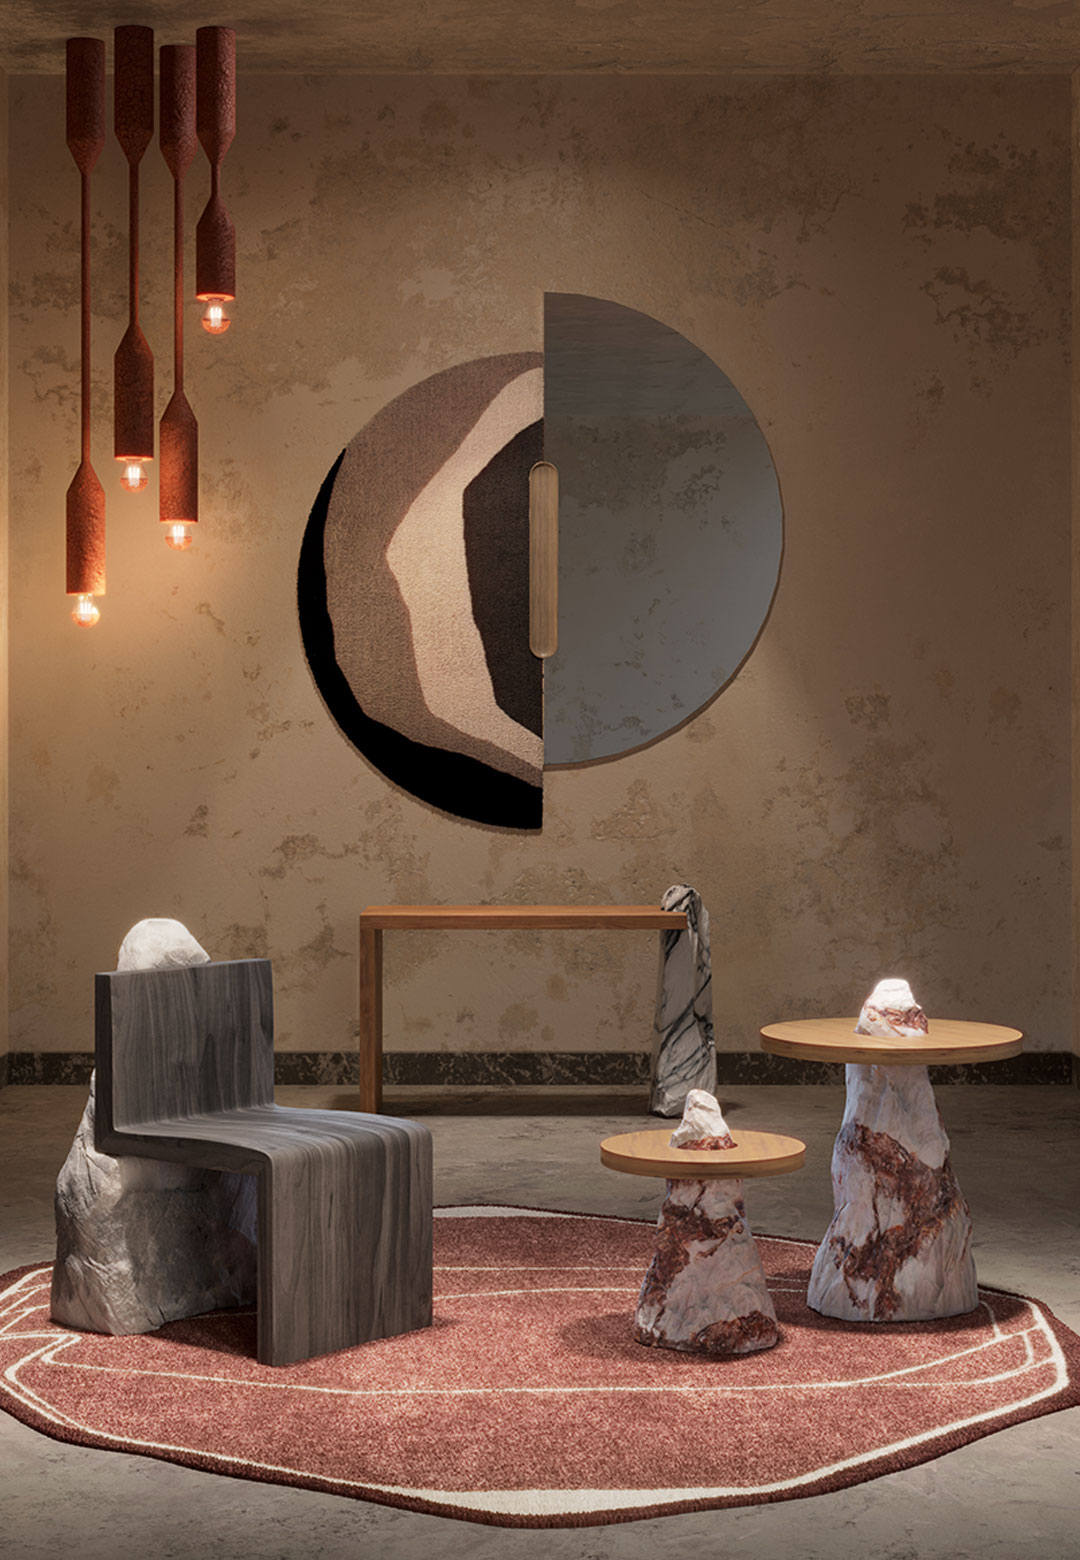 Biophilic design meets rugs and furniture in ‘The Art of Formation’ at Alcova